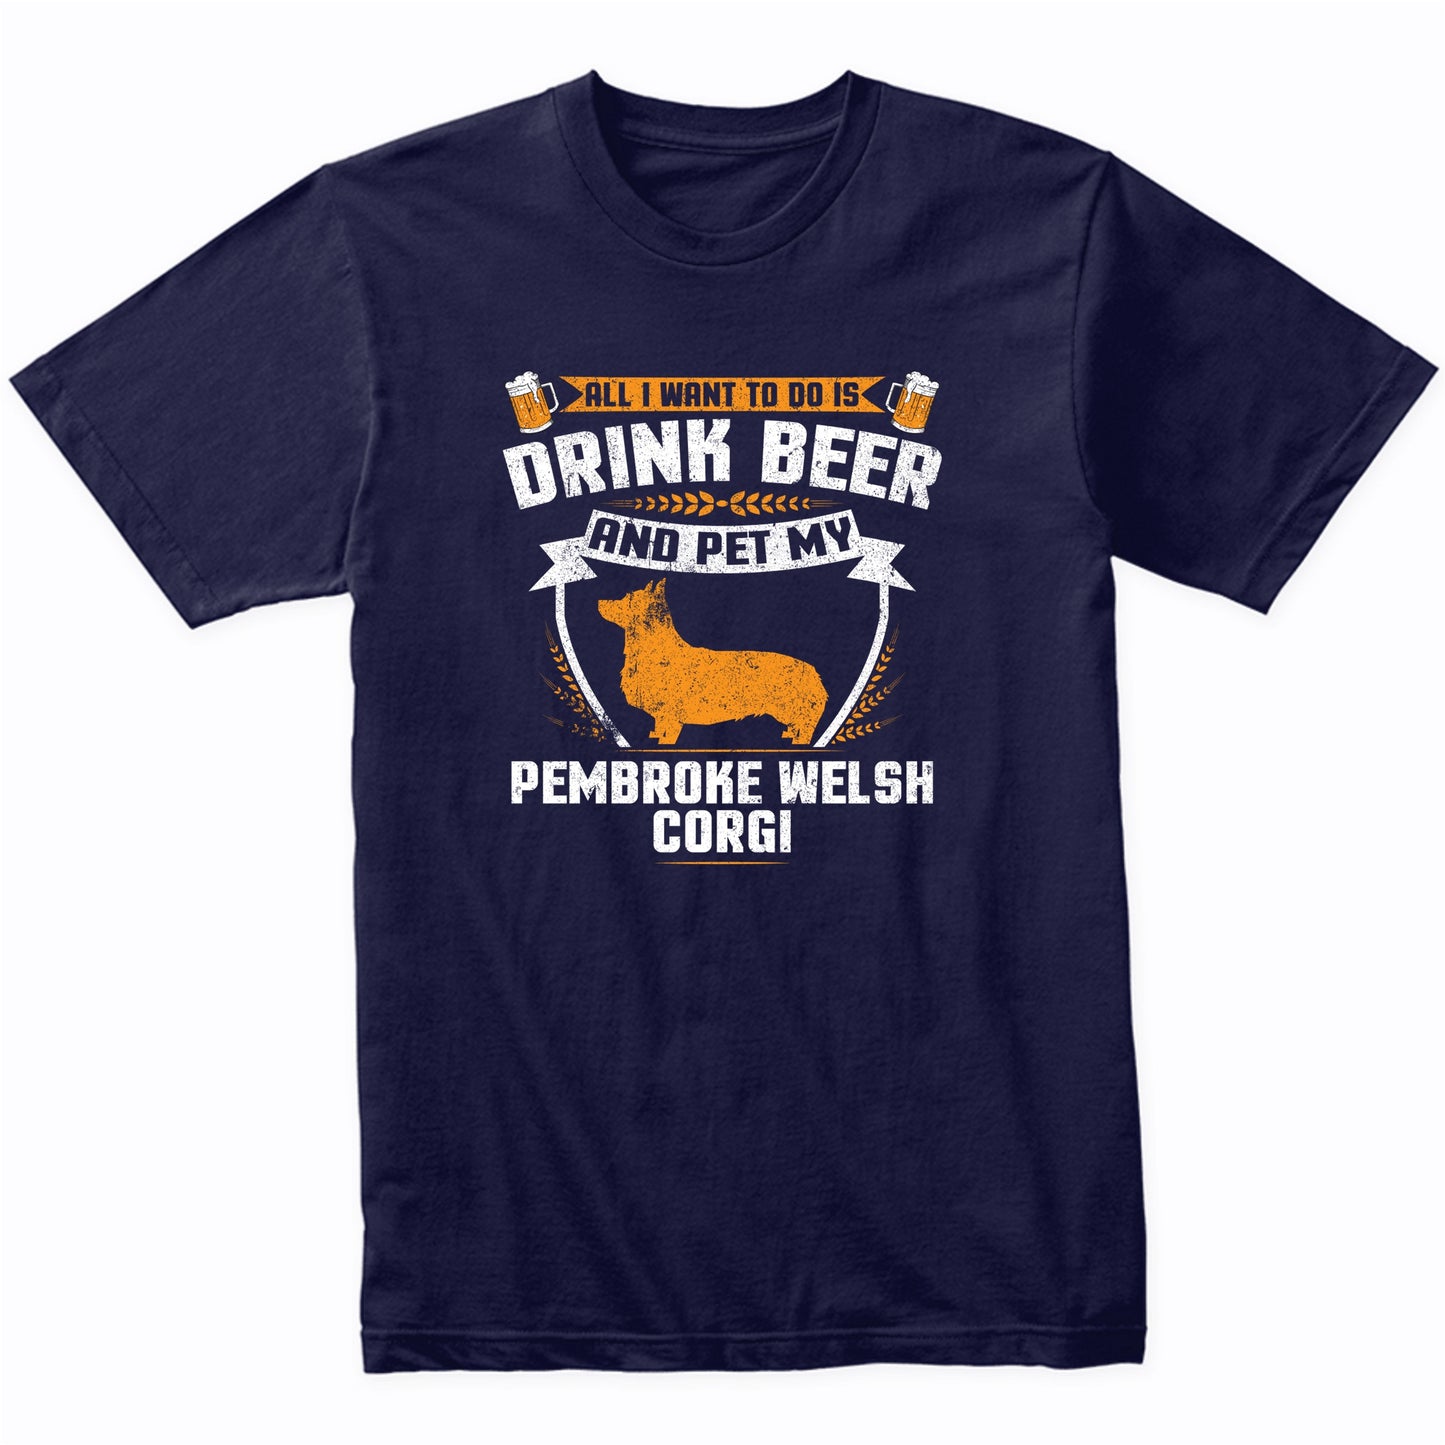 All I Want To Do Is Drink Beer And Pet My Pembroke Welsh Corgi Funny Dog Owner Shirt